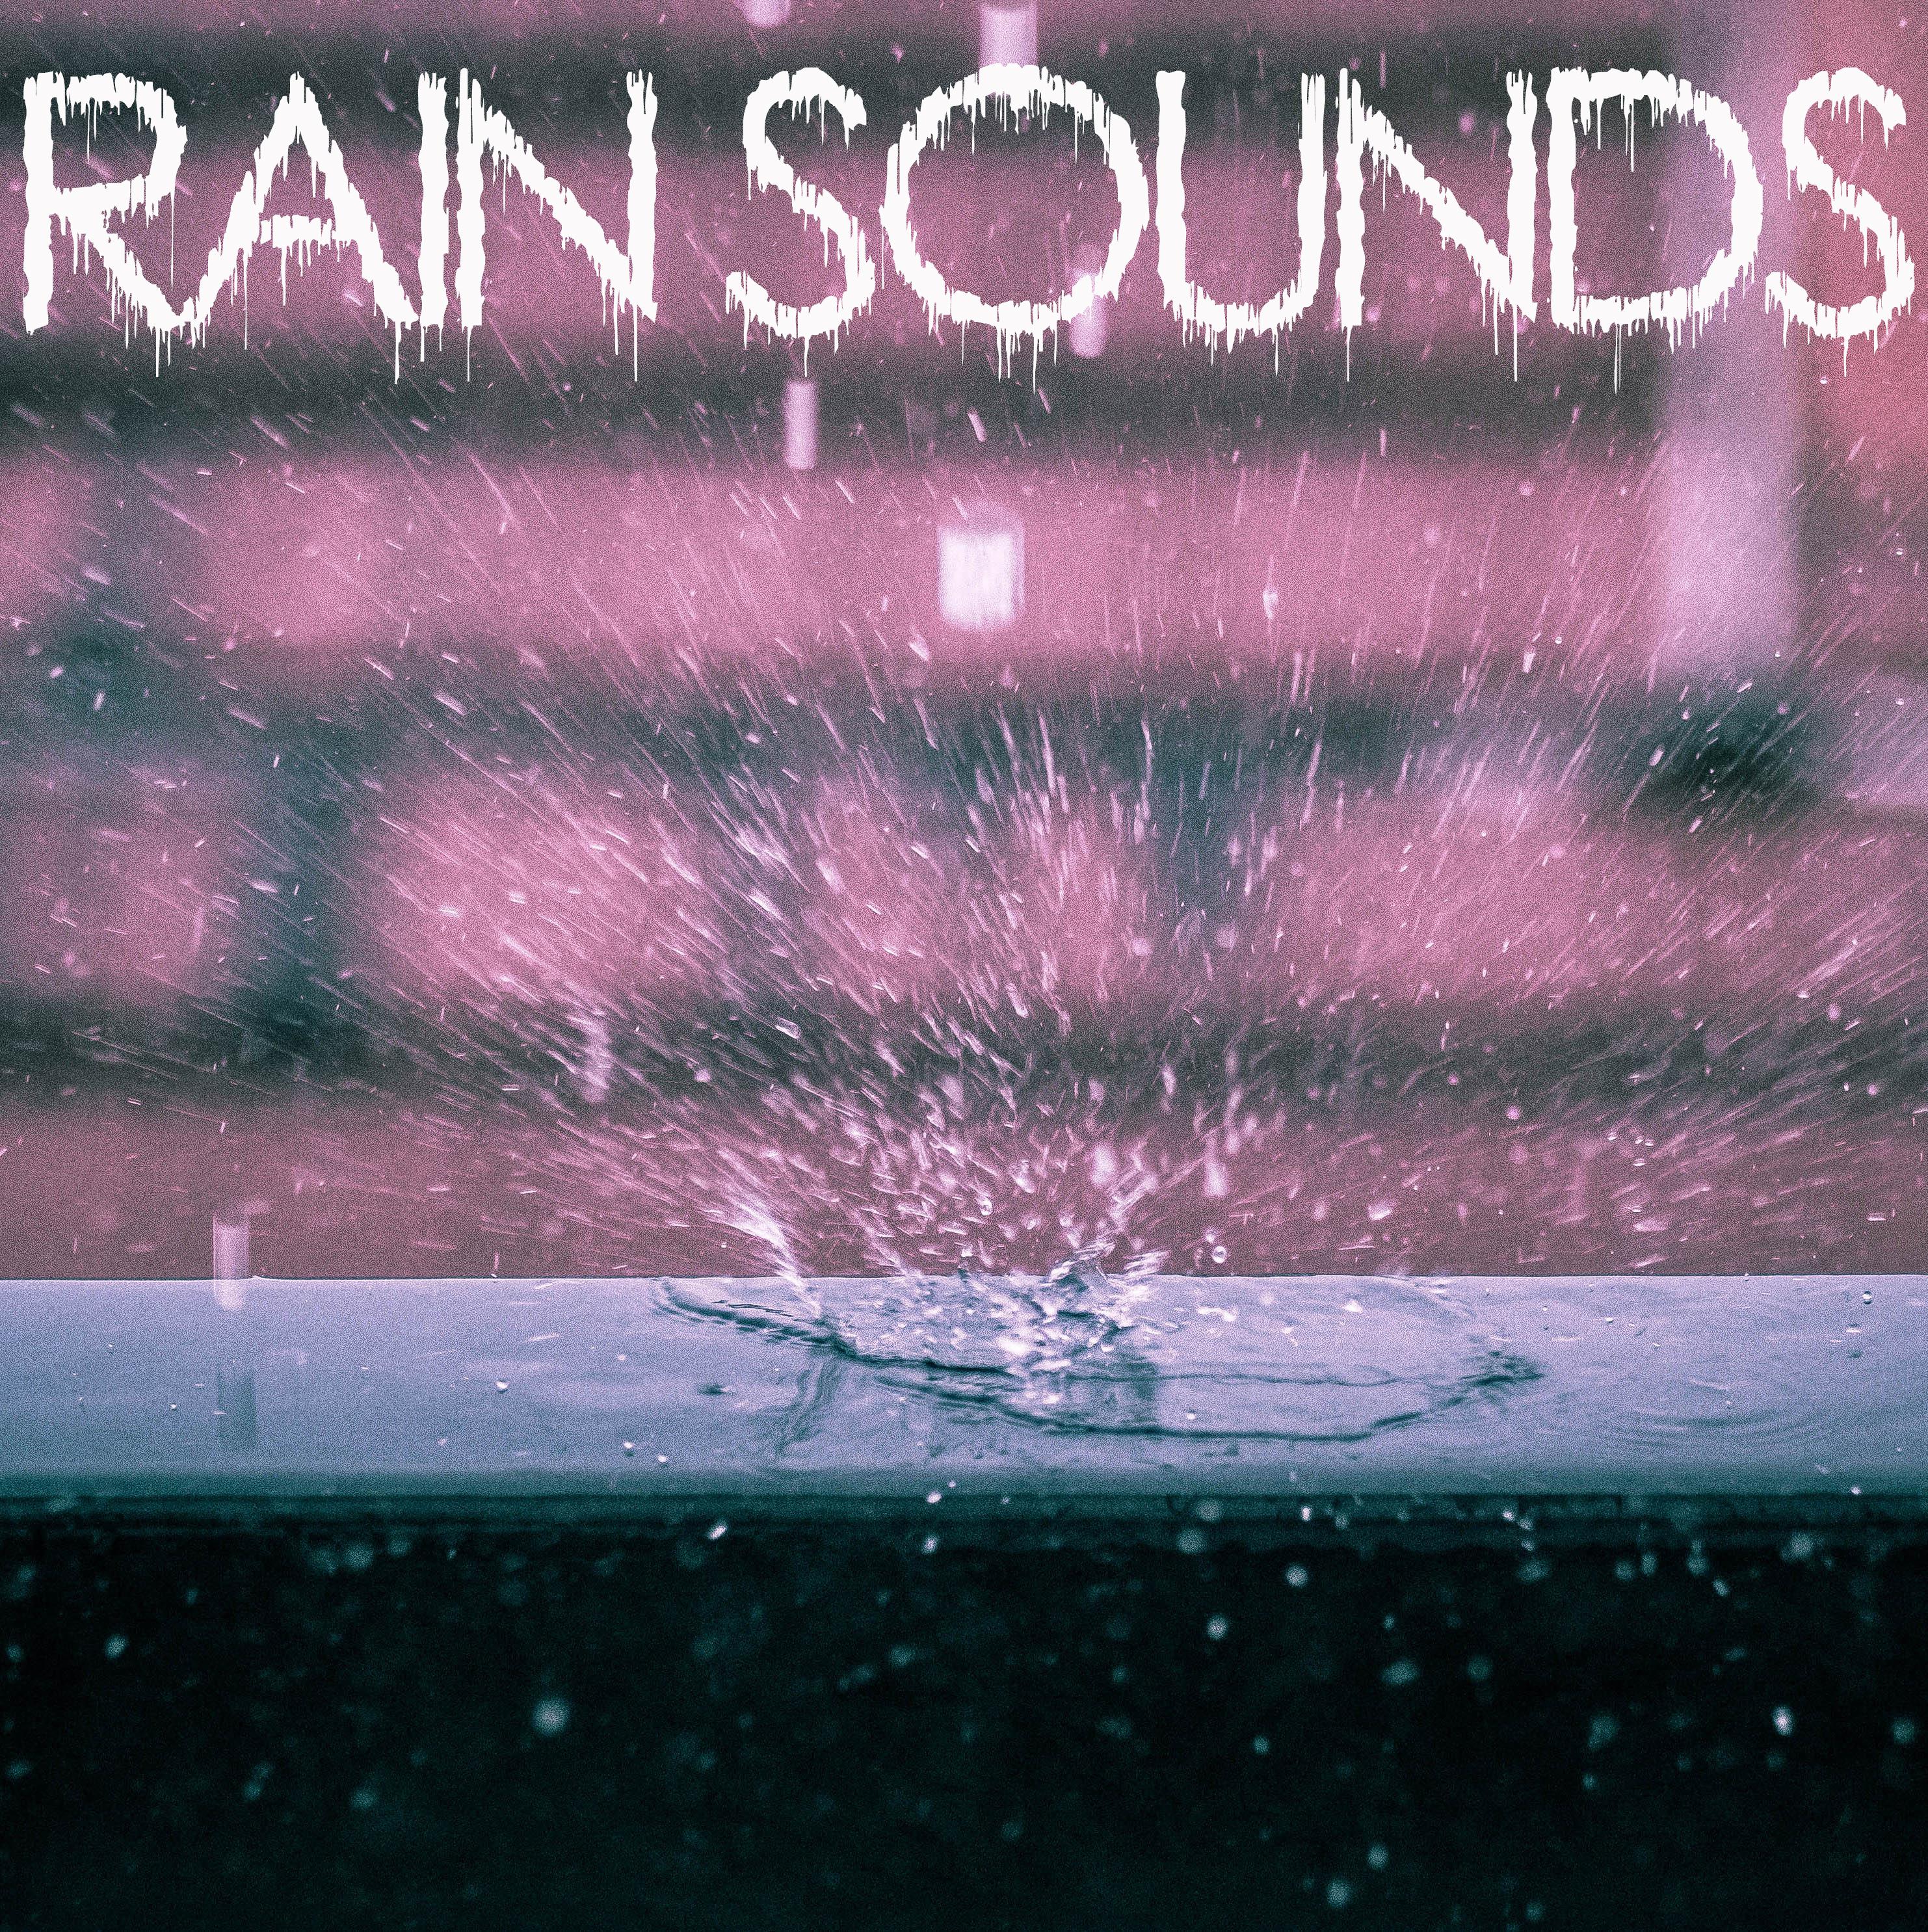 13 Sounds of Relaxing and Soothing Rain. Spa and Meditation, Sleep and Relaxation